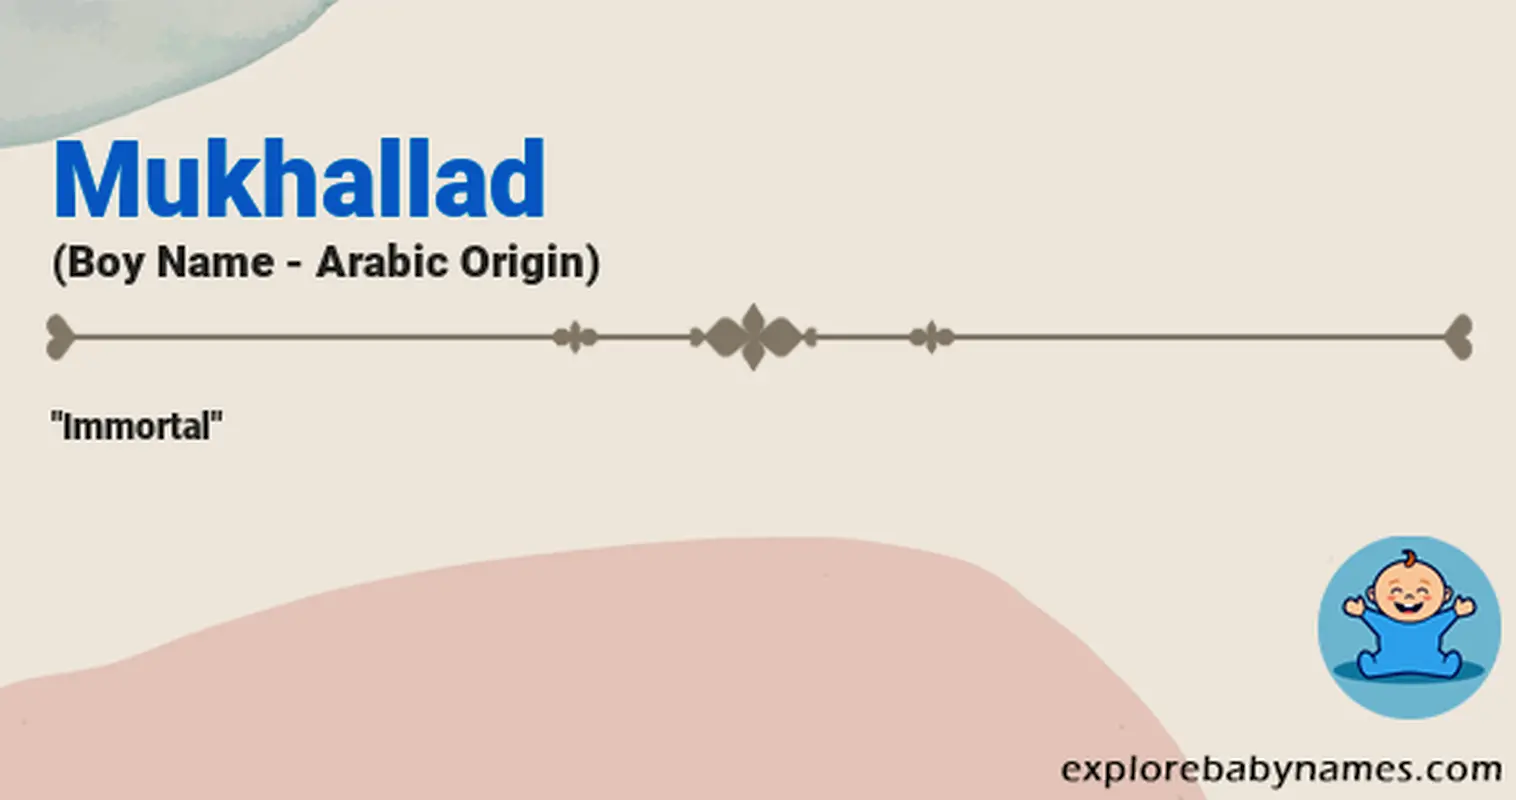 Meaning of Mukhallad